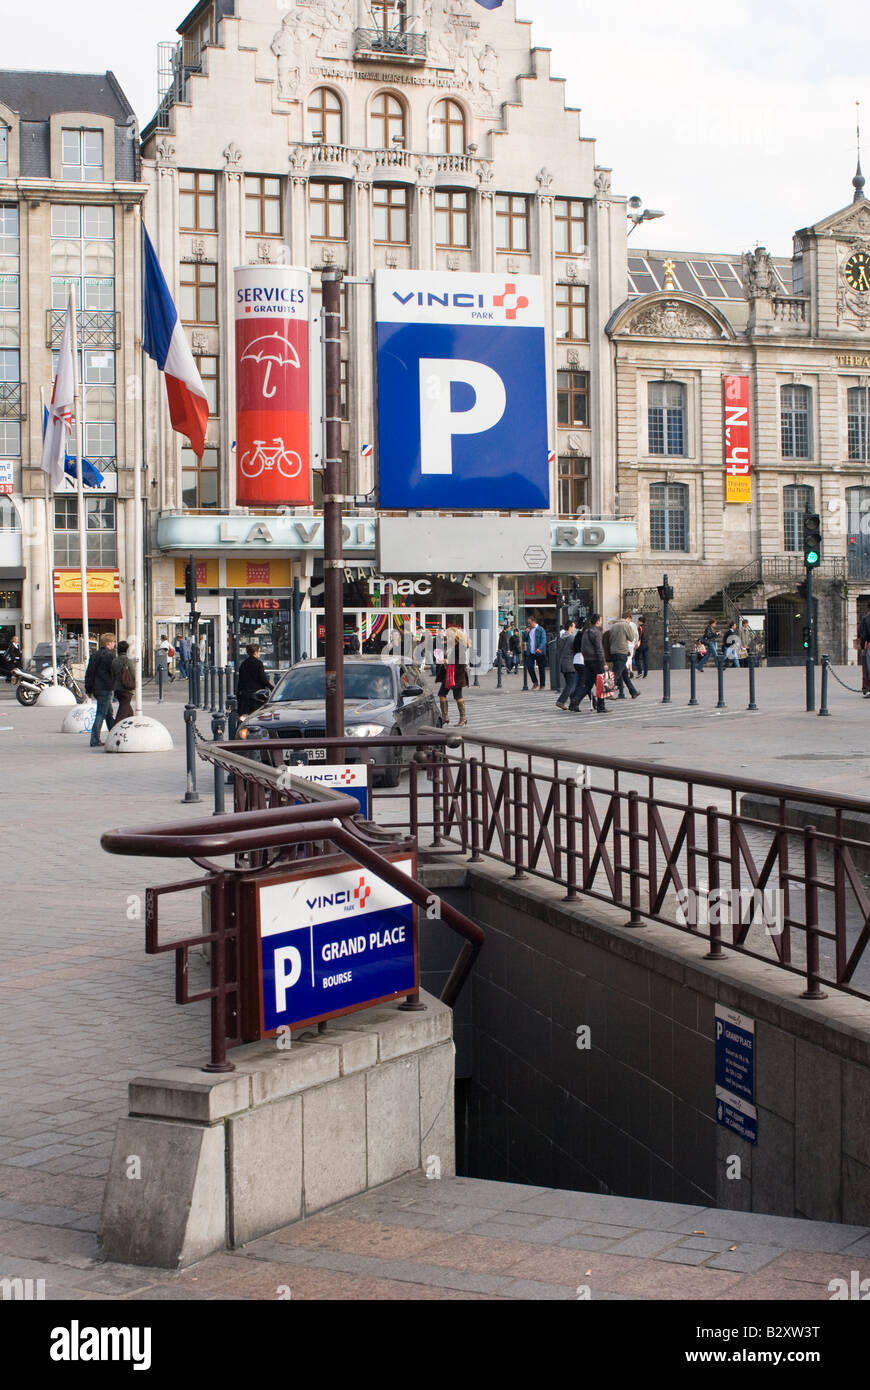 Underground car parking in the french town of Lille France Stock Photo